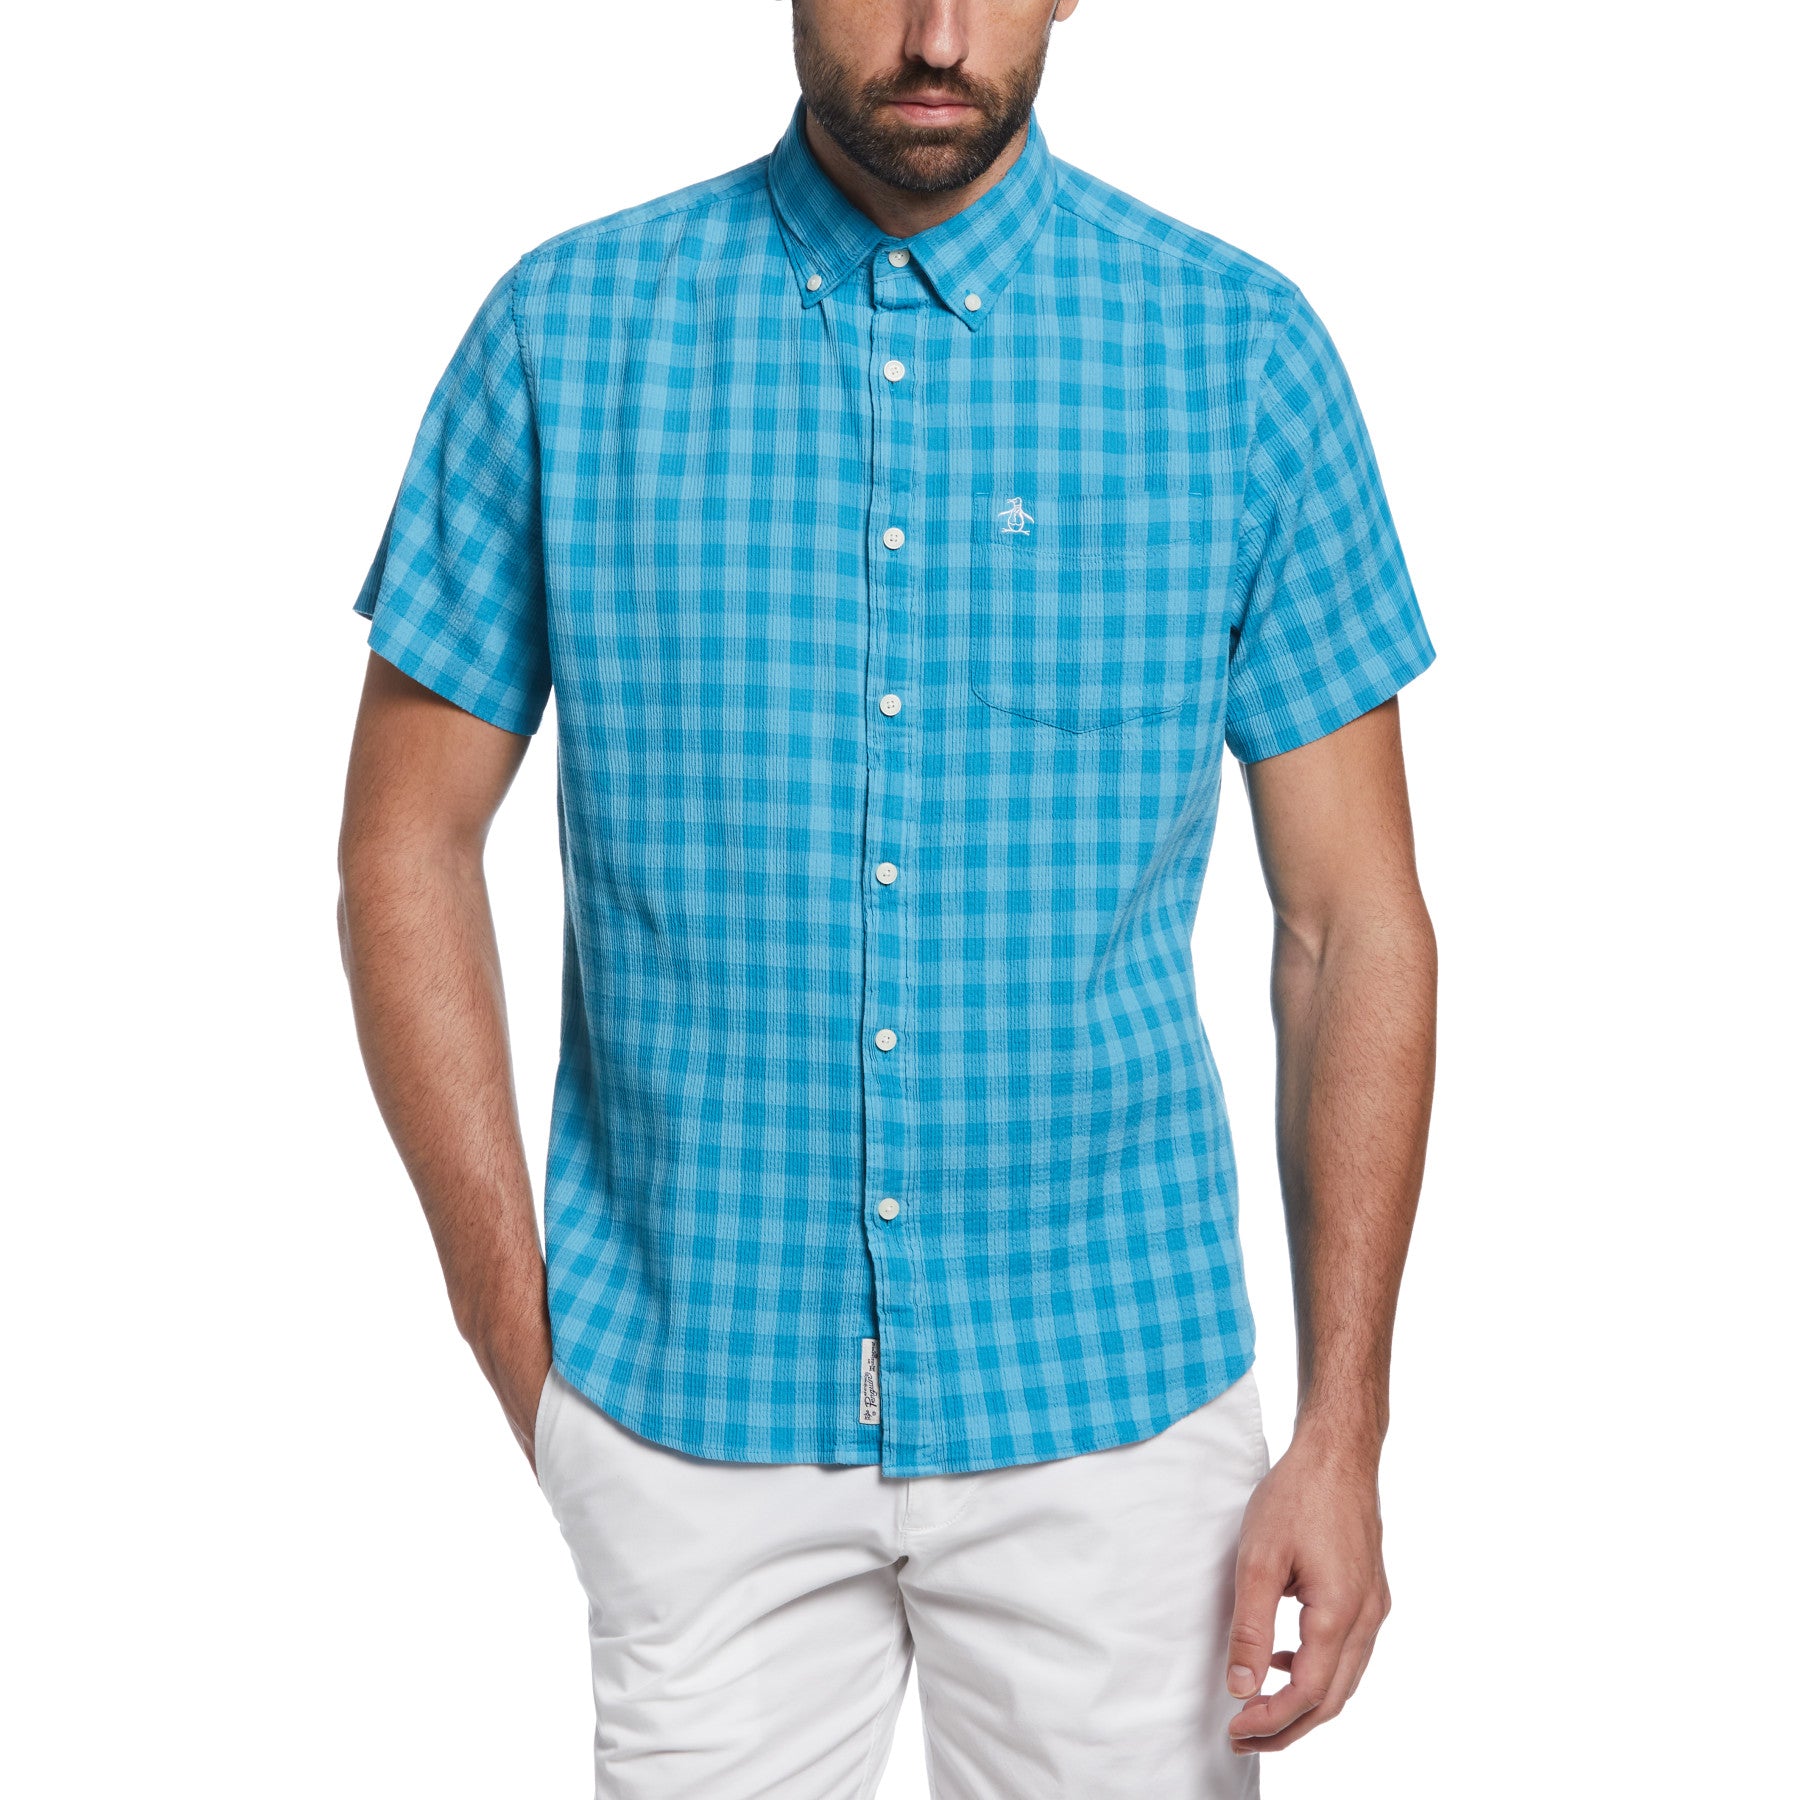 View Slim Fit Check Print Shirt In Mosaic Blue information